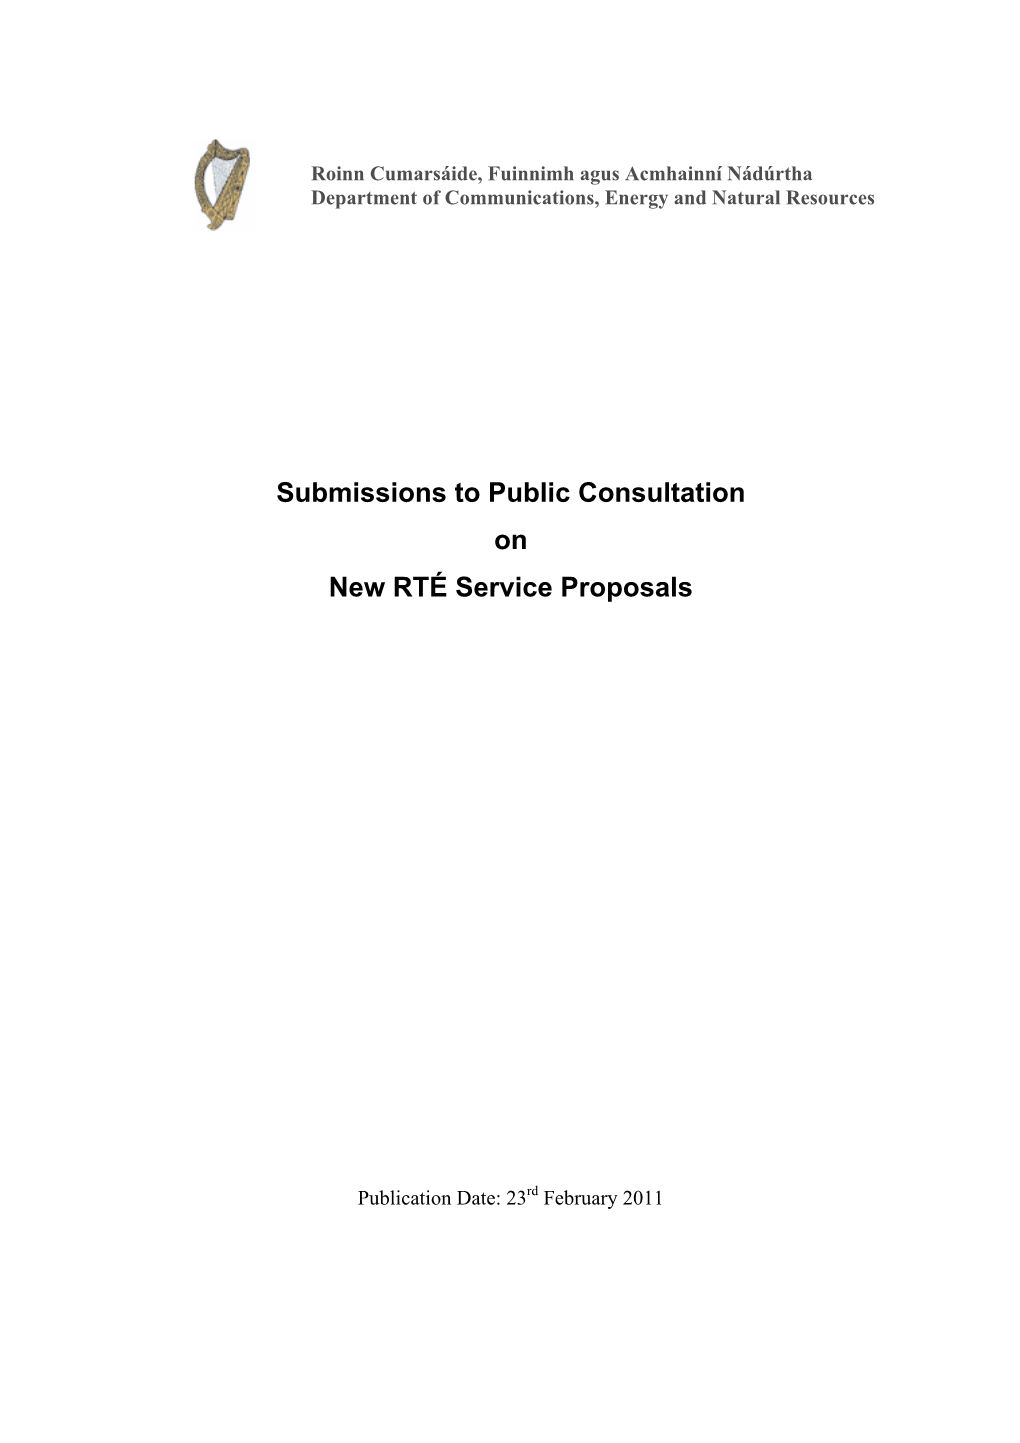 Submissions to Public Consultation on New RTÉ Service Proposals